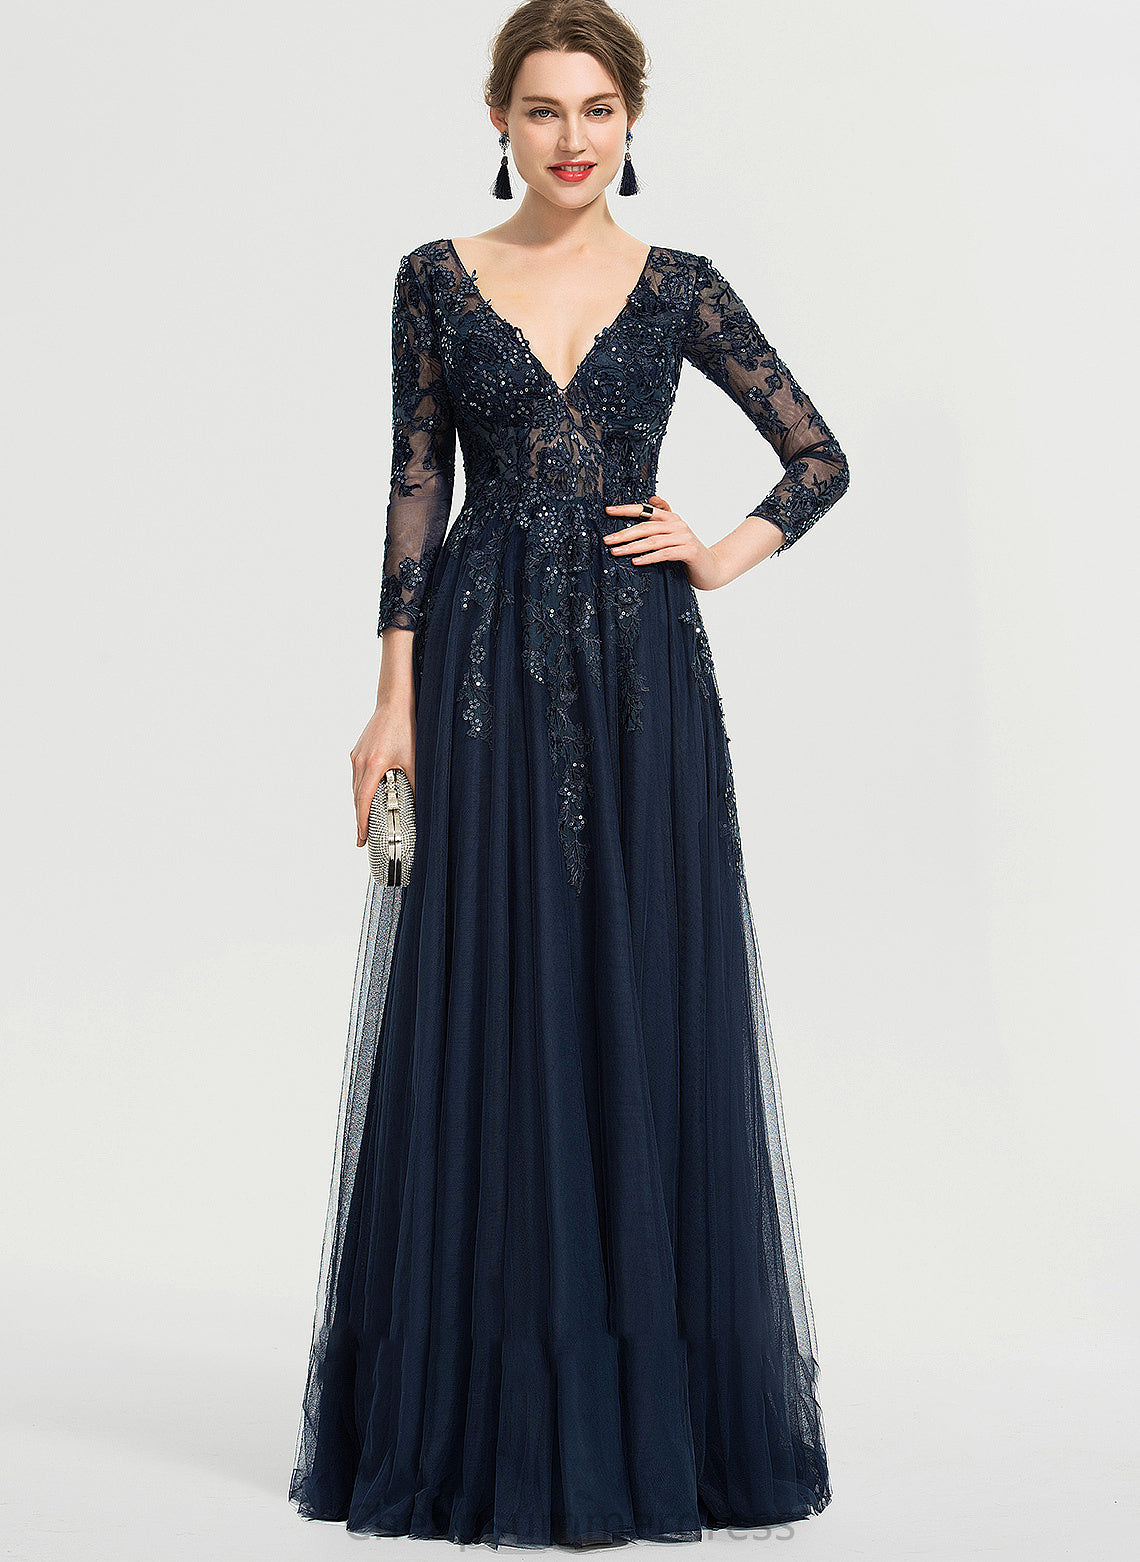 Sequins With Prom Dresses Nayeli V-neck Floor-Length A-Line Tulle